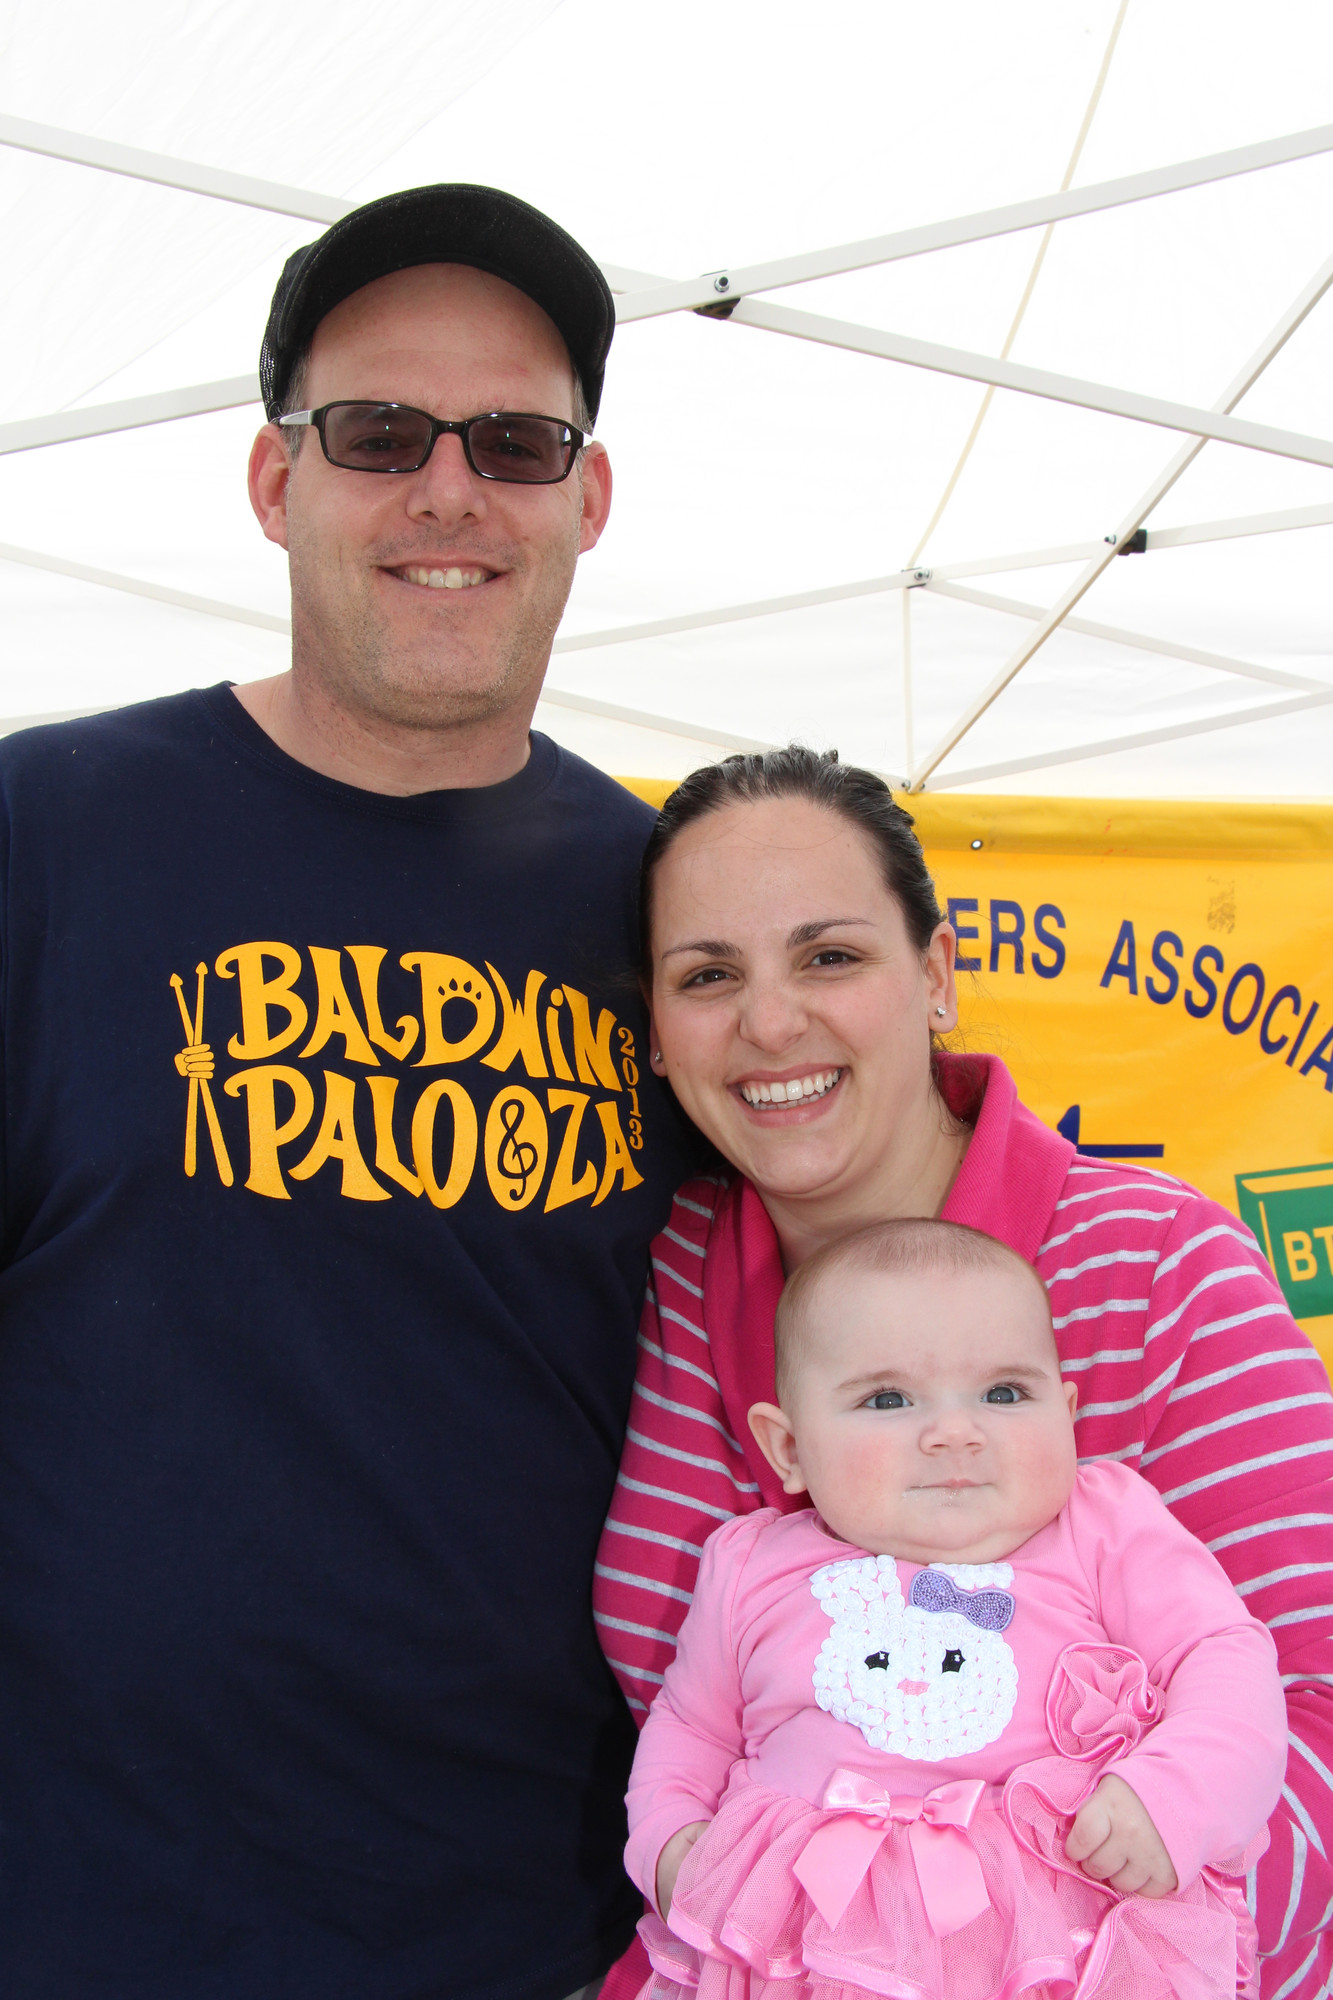 Annabella Fahey, 5 months, was on her first Easter egg hunt, with her mom Jennie and dad Chris.